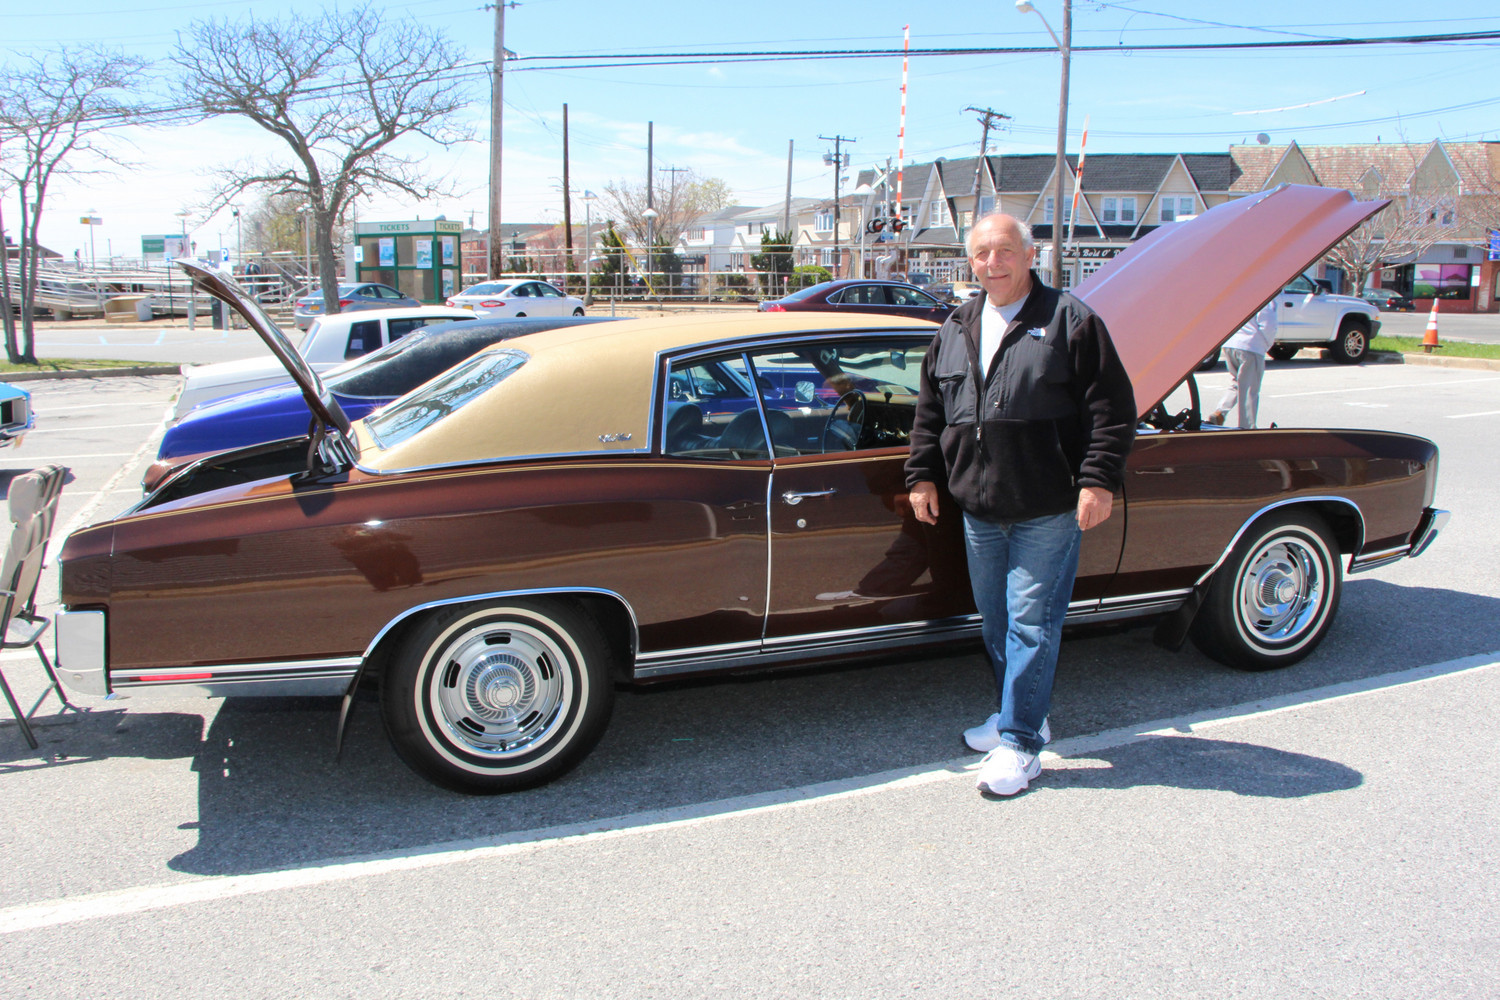 Rich Cittadino, owner of 1972 Monte Carlo, He is the director of the East Rockaway Car Show that starts June 1, 2015 in East Rockaway.